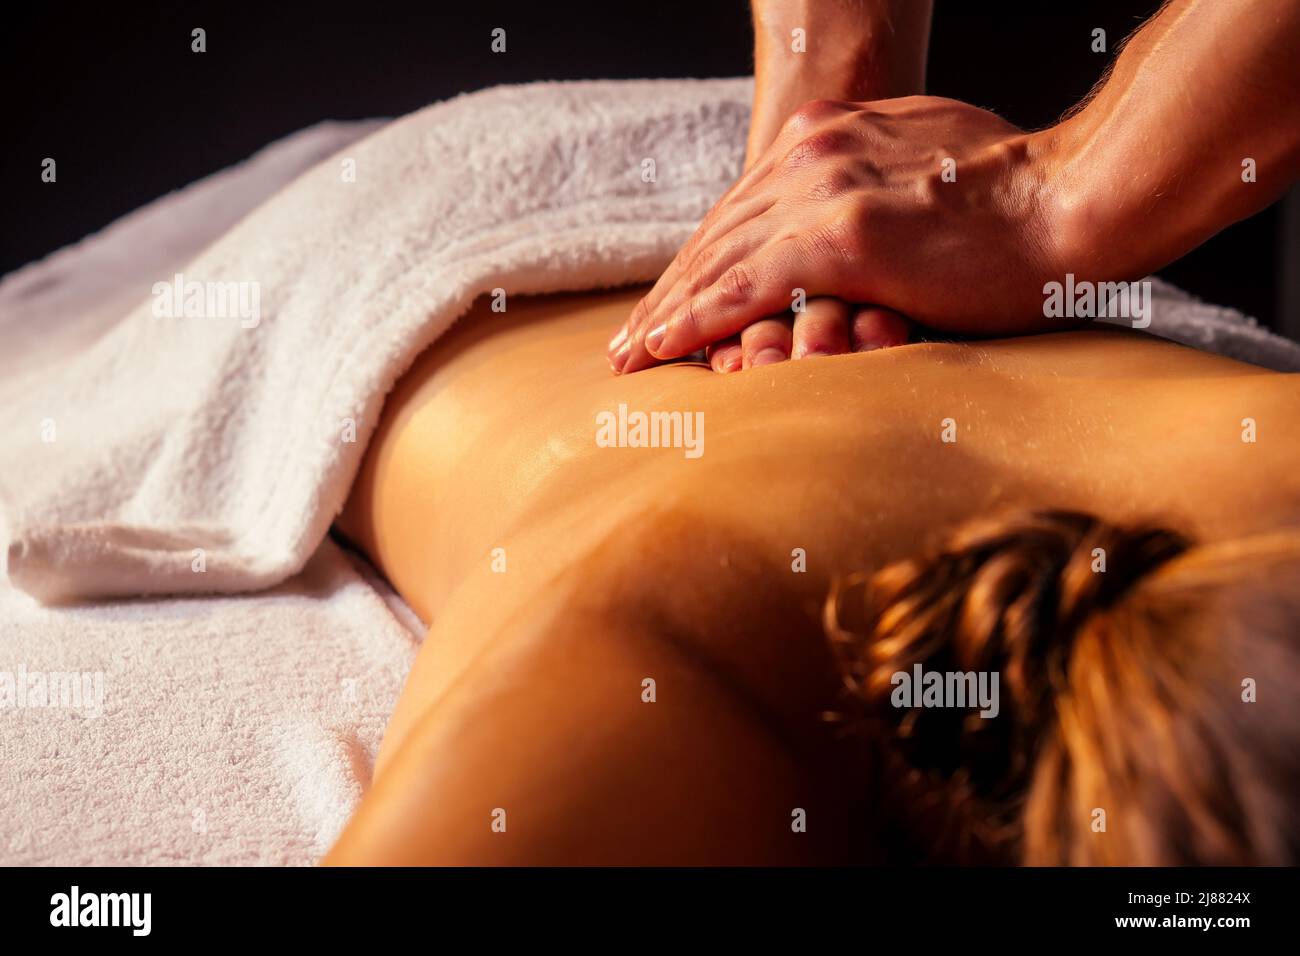 young indian woman lying on the table and getting ayurvedic massage with organic oil or honeyed in dark room.massagist male pouring out client back Stock Photo